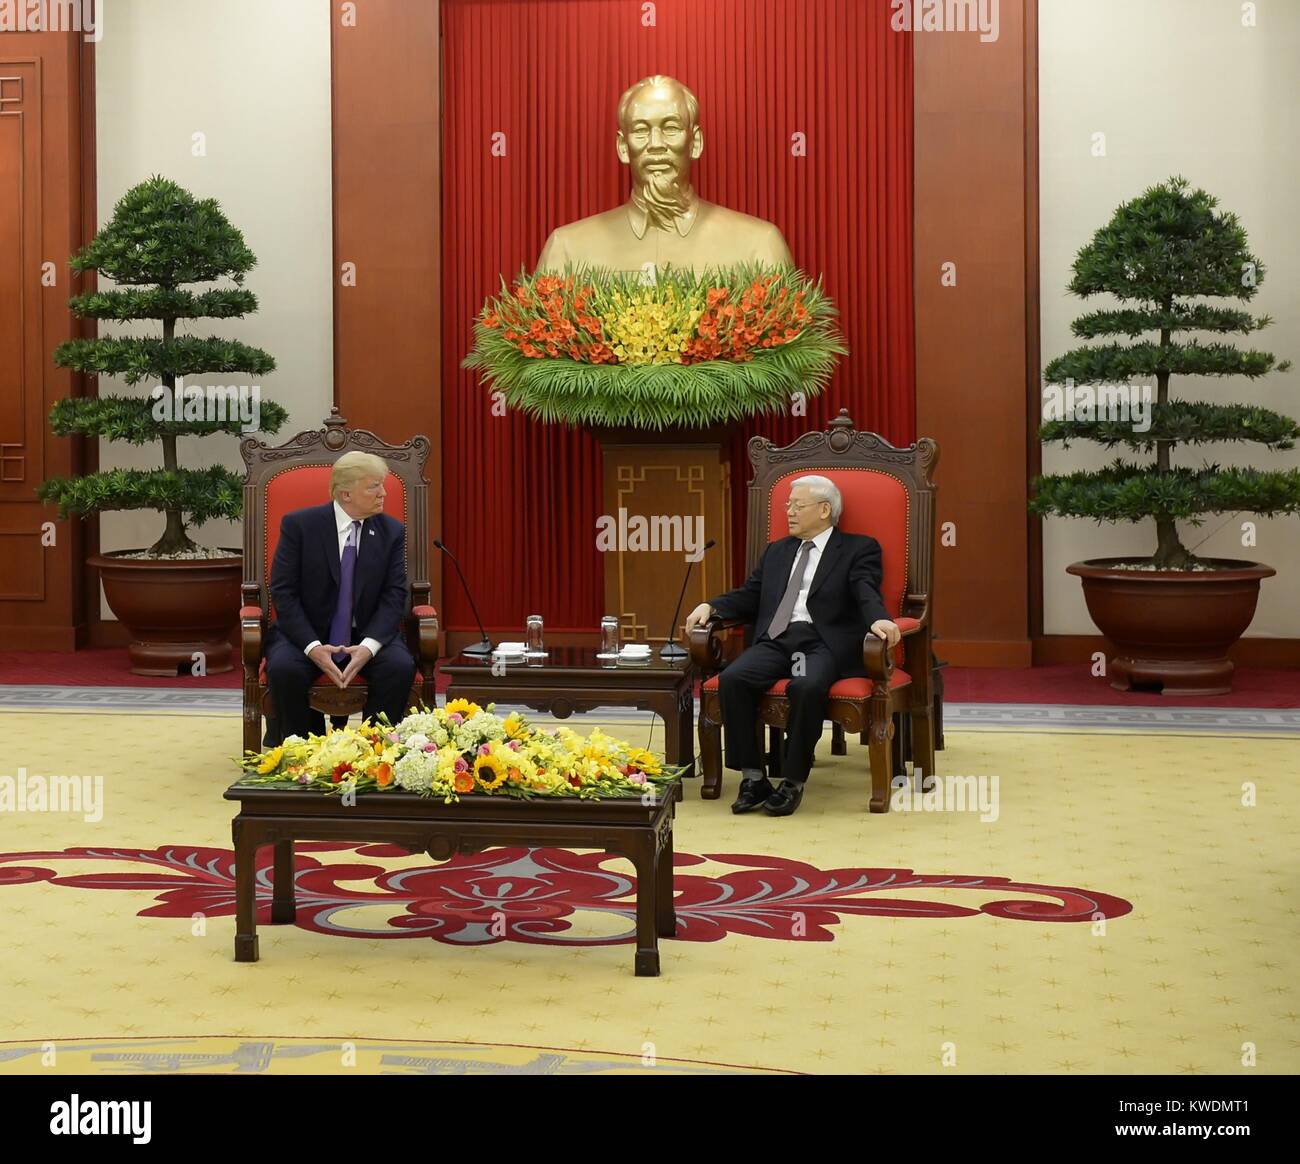 President Donald Trump at the Vietnam Communist Party Headquarters in Hanoi, Vietnam. On Nov. 12, 2017 he met with the Secretary General of the Communist Party, Nguyen Phu Trong (BSLOC_2017_18_49) Stock Photo